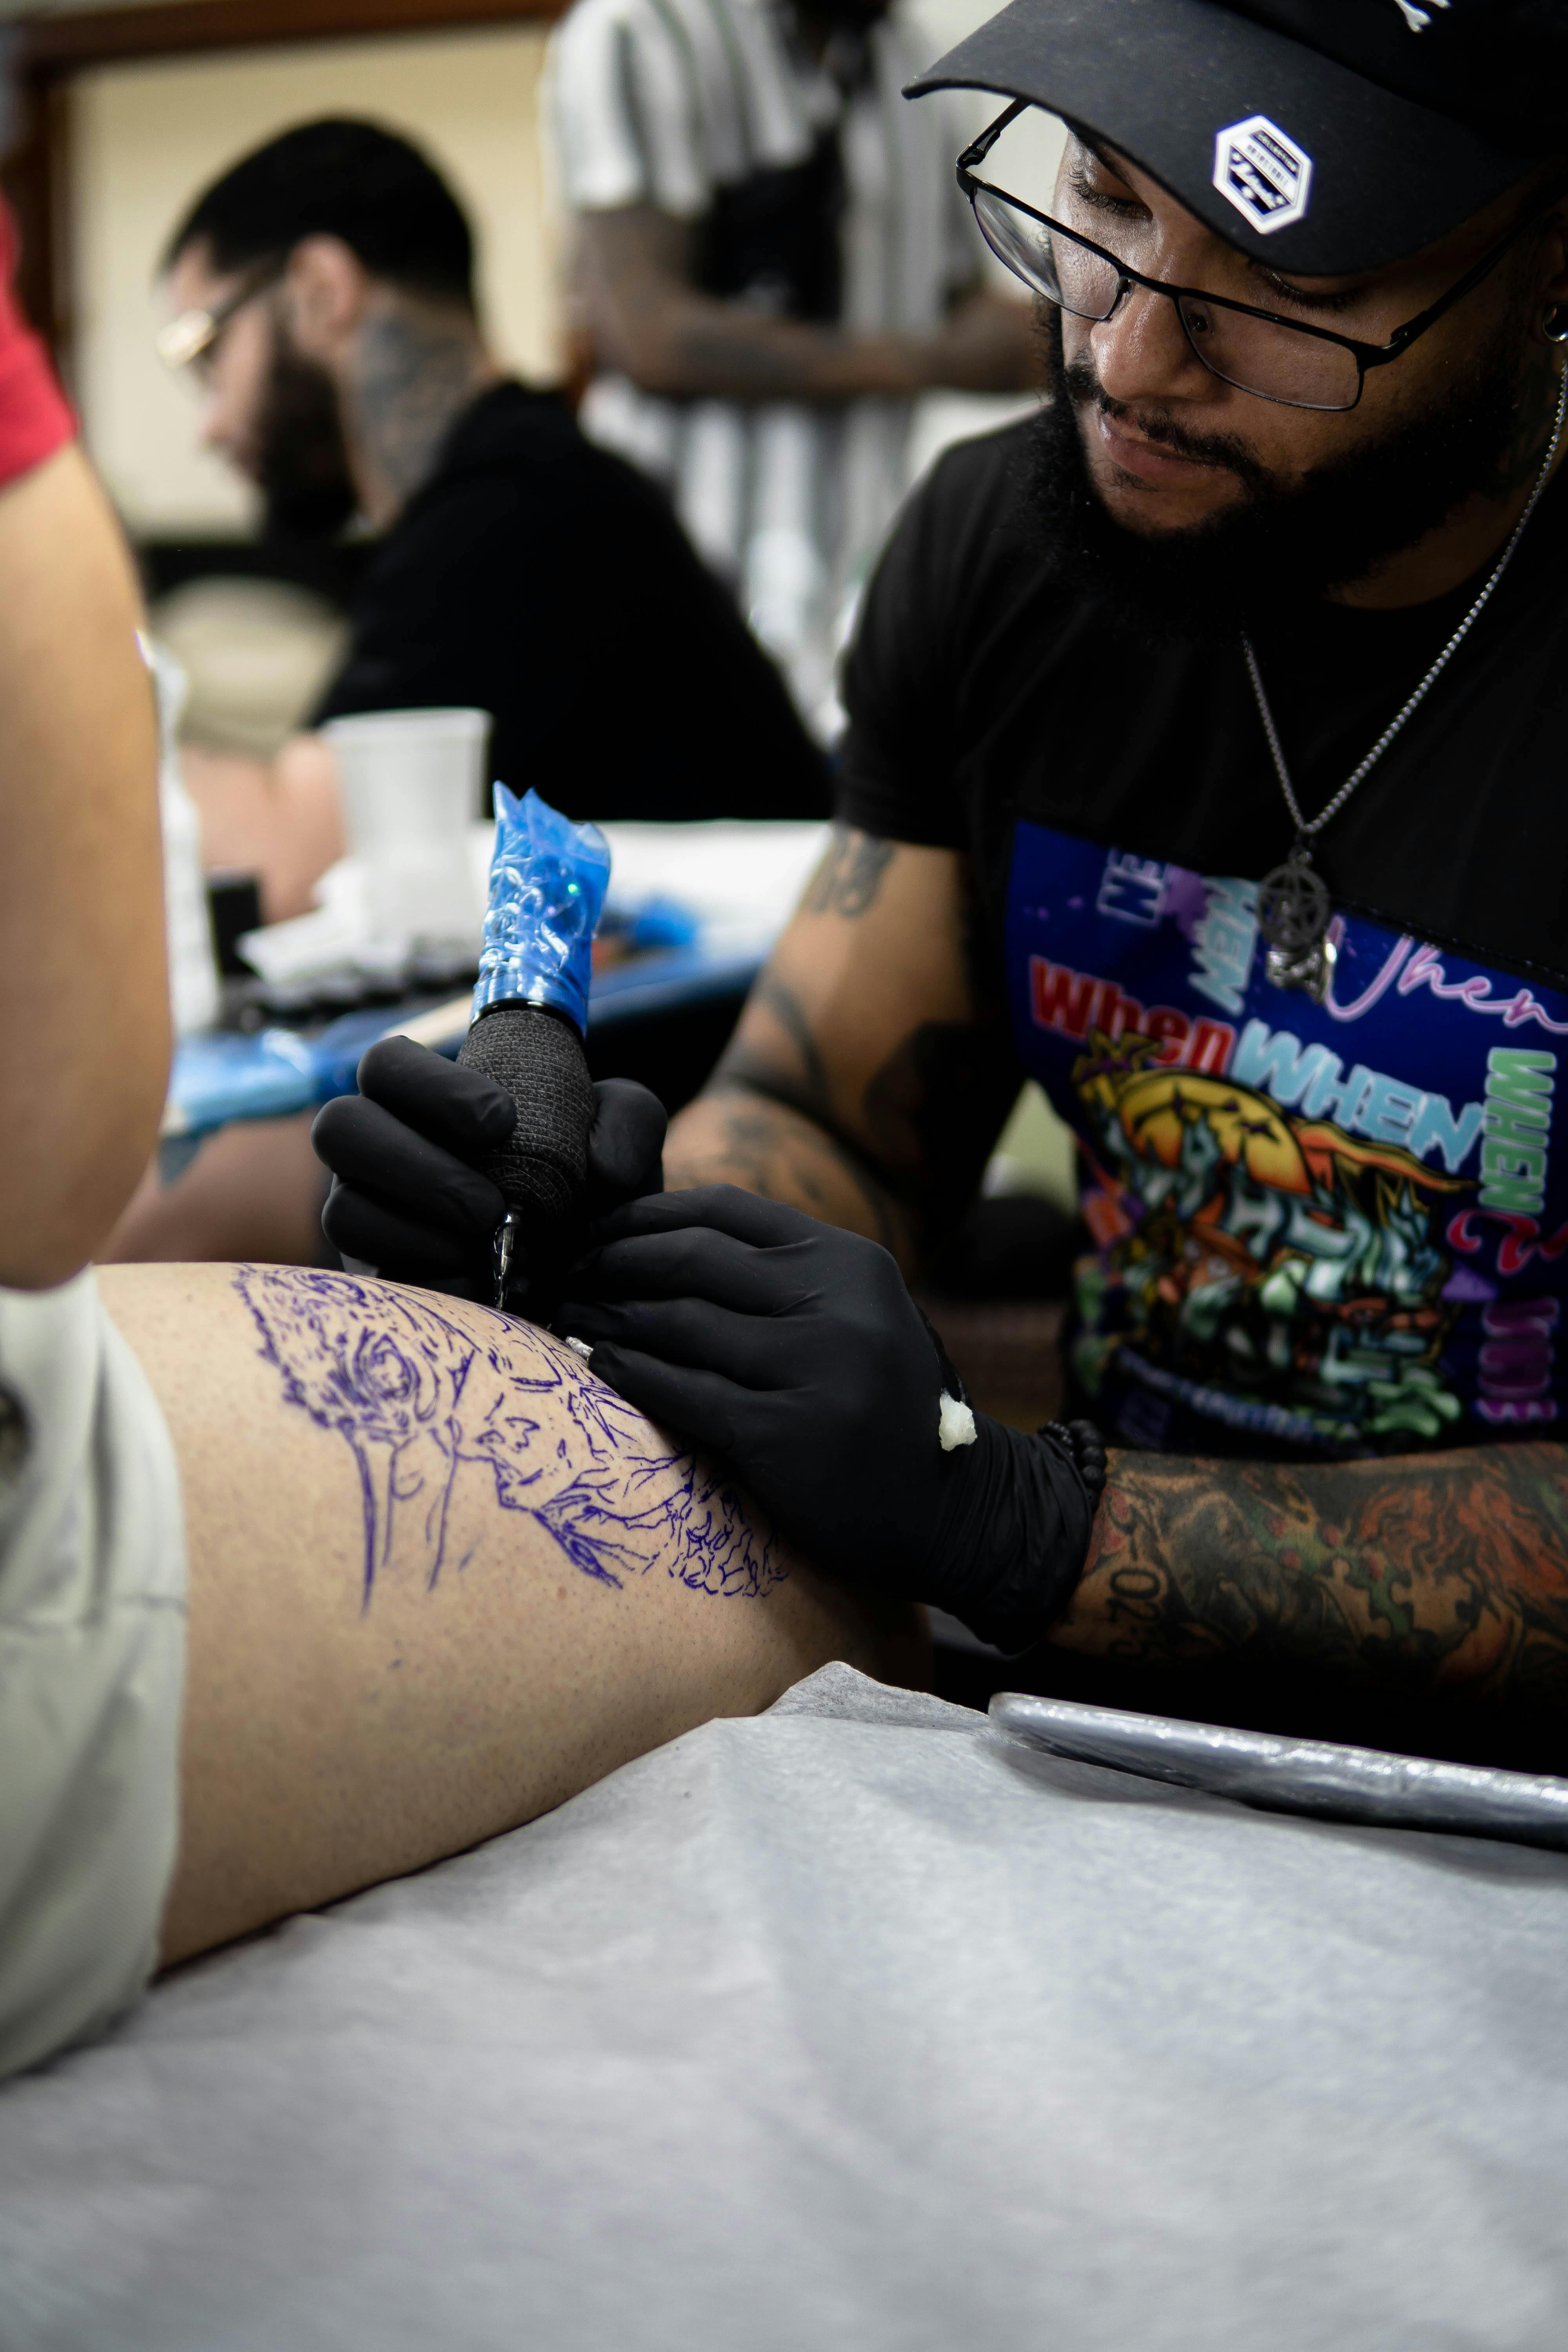 Enter for a chance to win a free tattoo at Rock the Garden